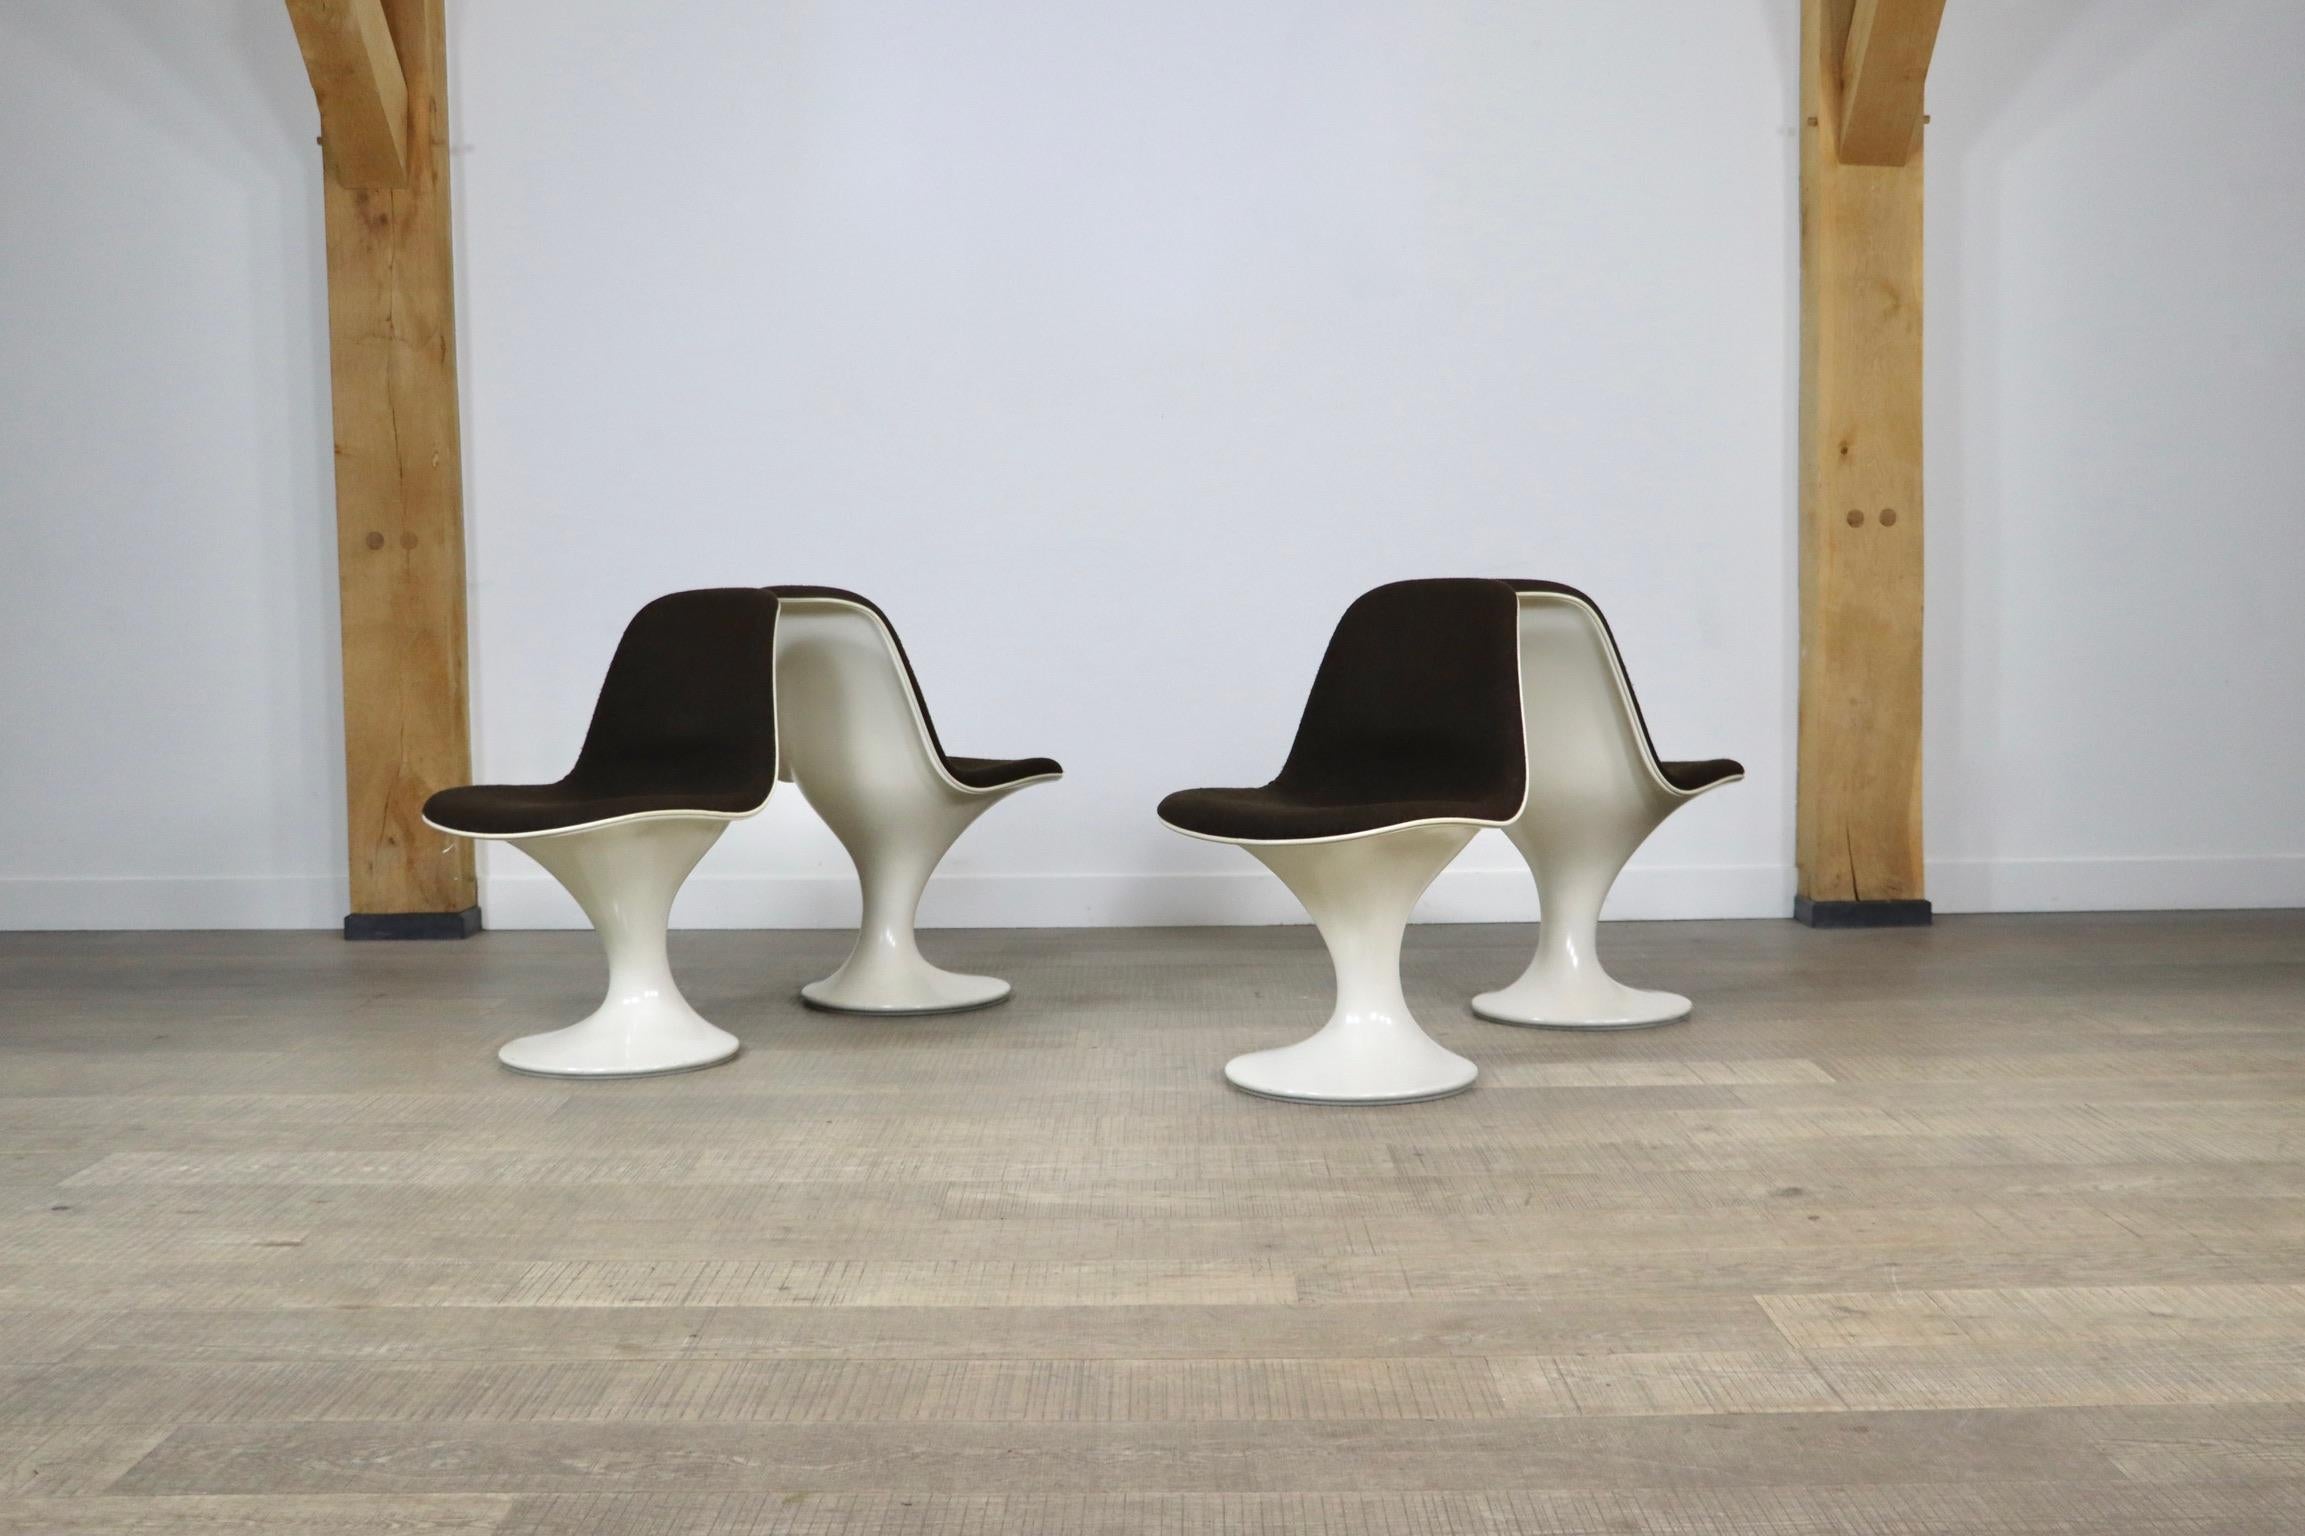 Mid-20th Century Set of 4 Orbit Chairs by Farner & Grunder for Herman Miller, 1965